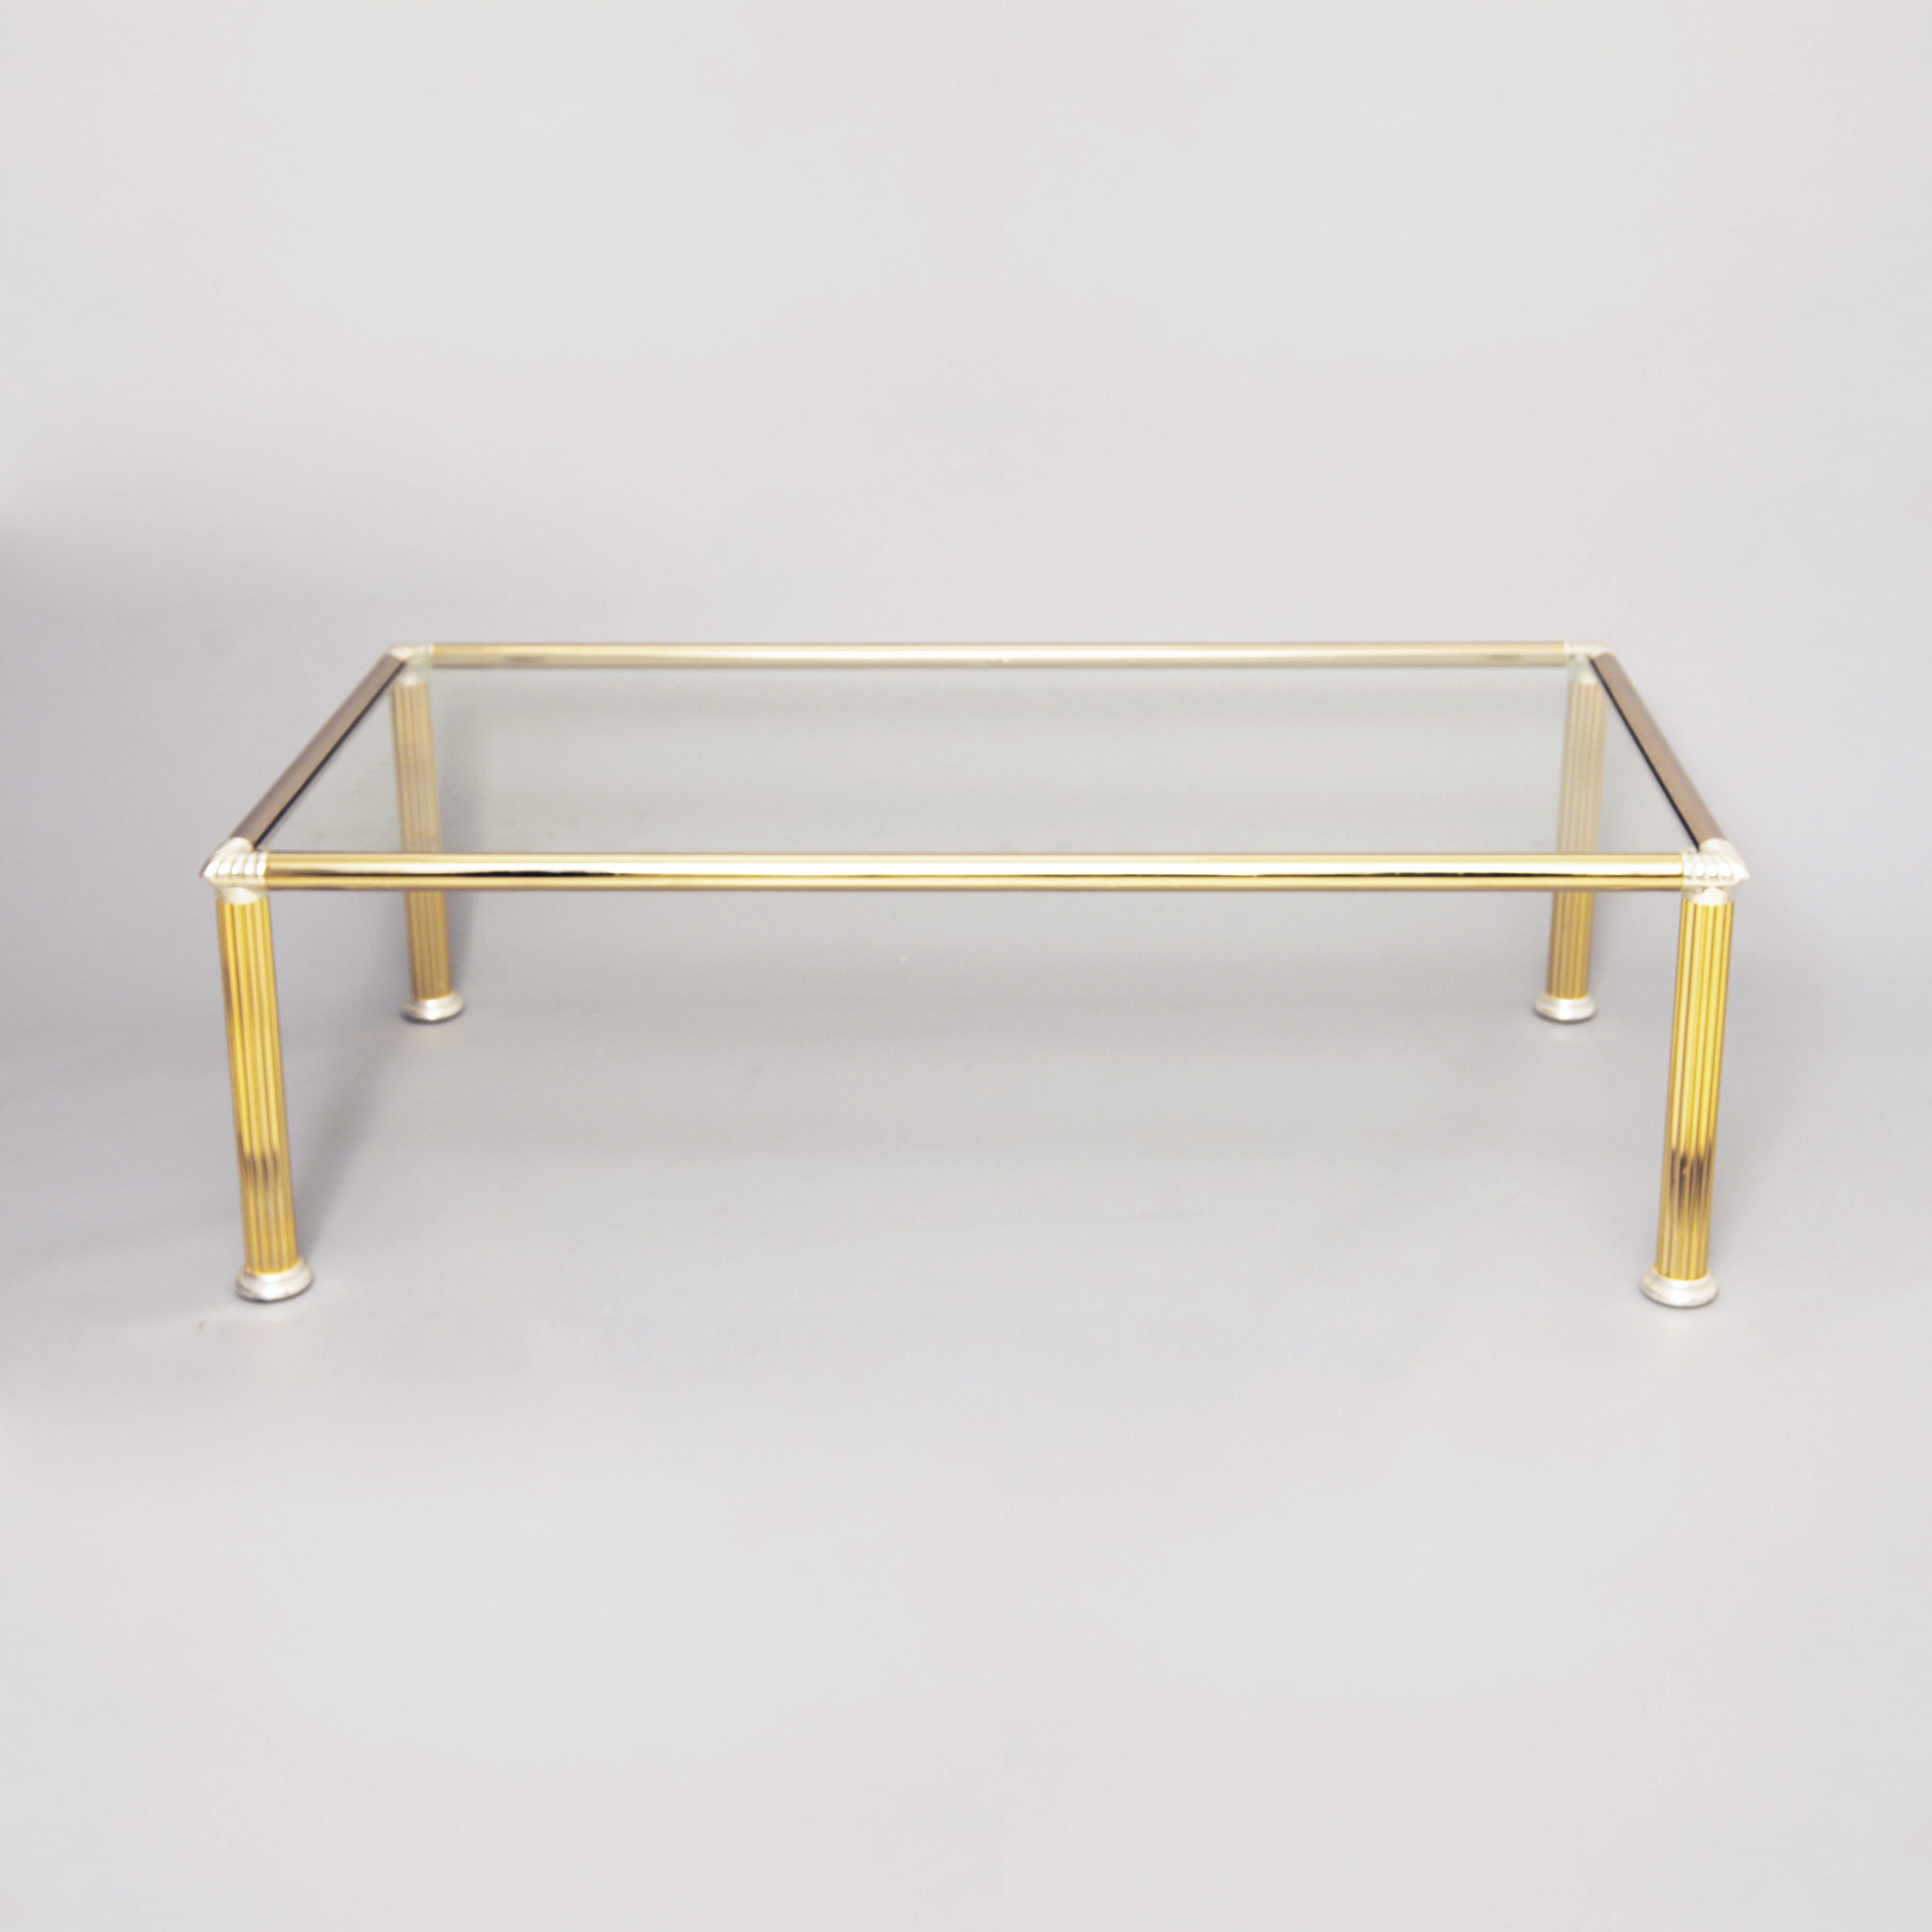 Chrome and brass-plated rectangular coffee table with column shaped legs and corners. Clear glass top.